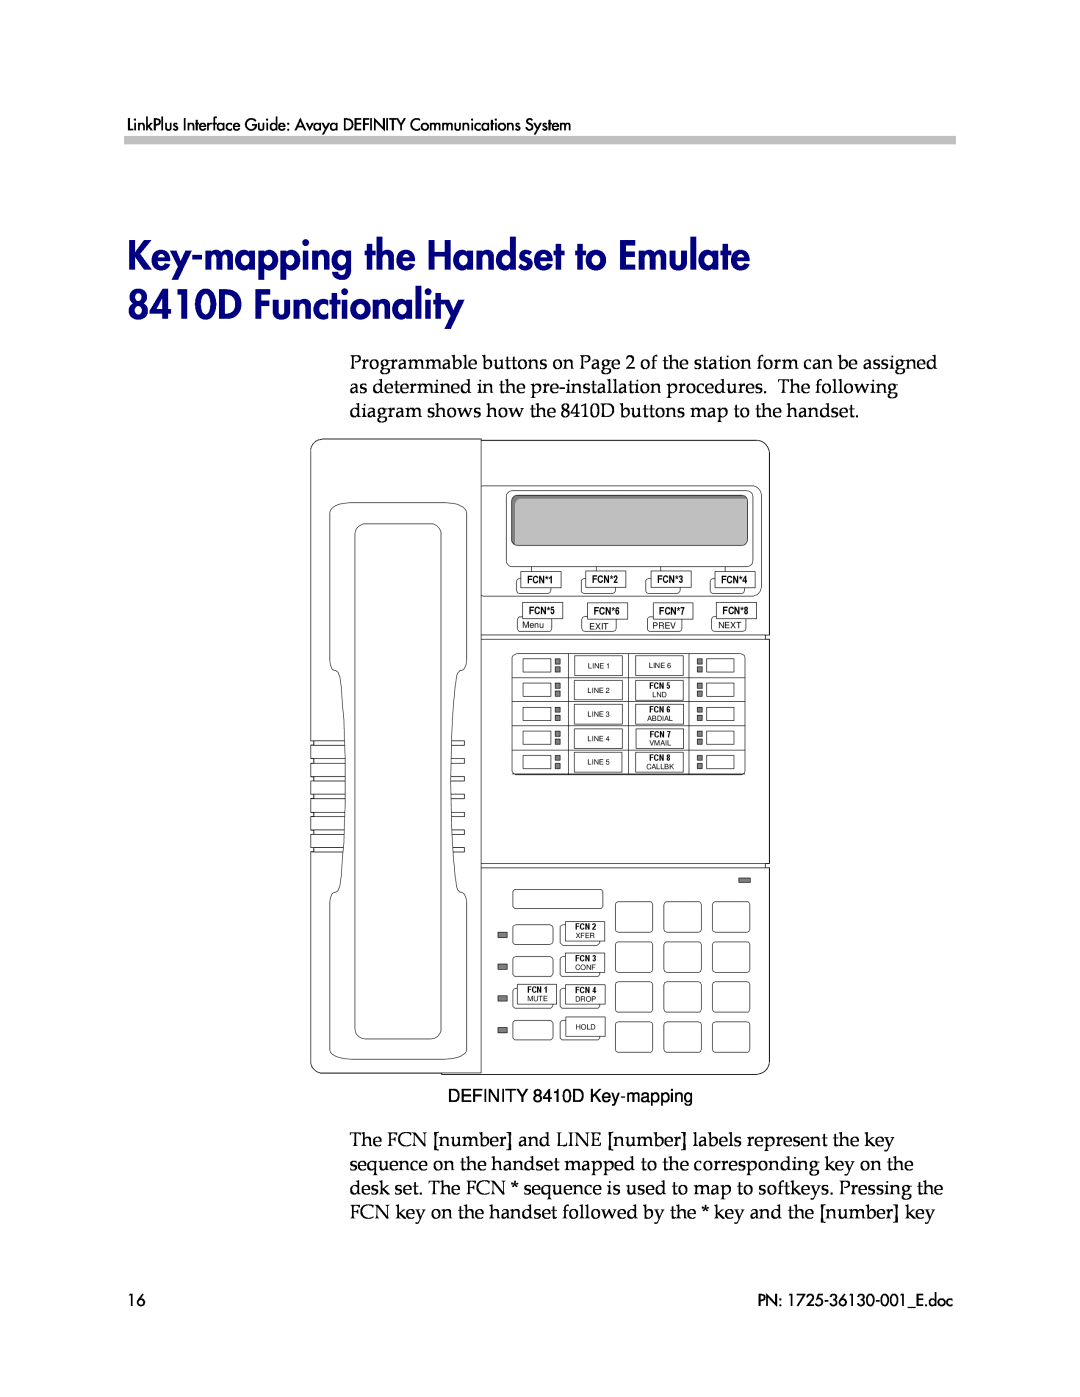 Polycom 1725-361300-001 manual Key-mapping the Handset to Emulate 8410D Functionality, DEFINITY 8410D Key-mapping 